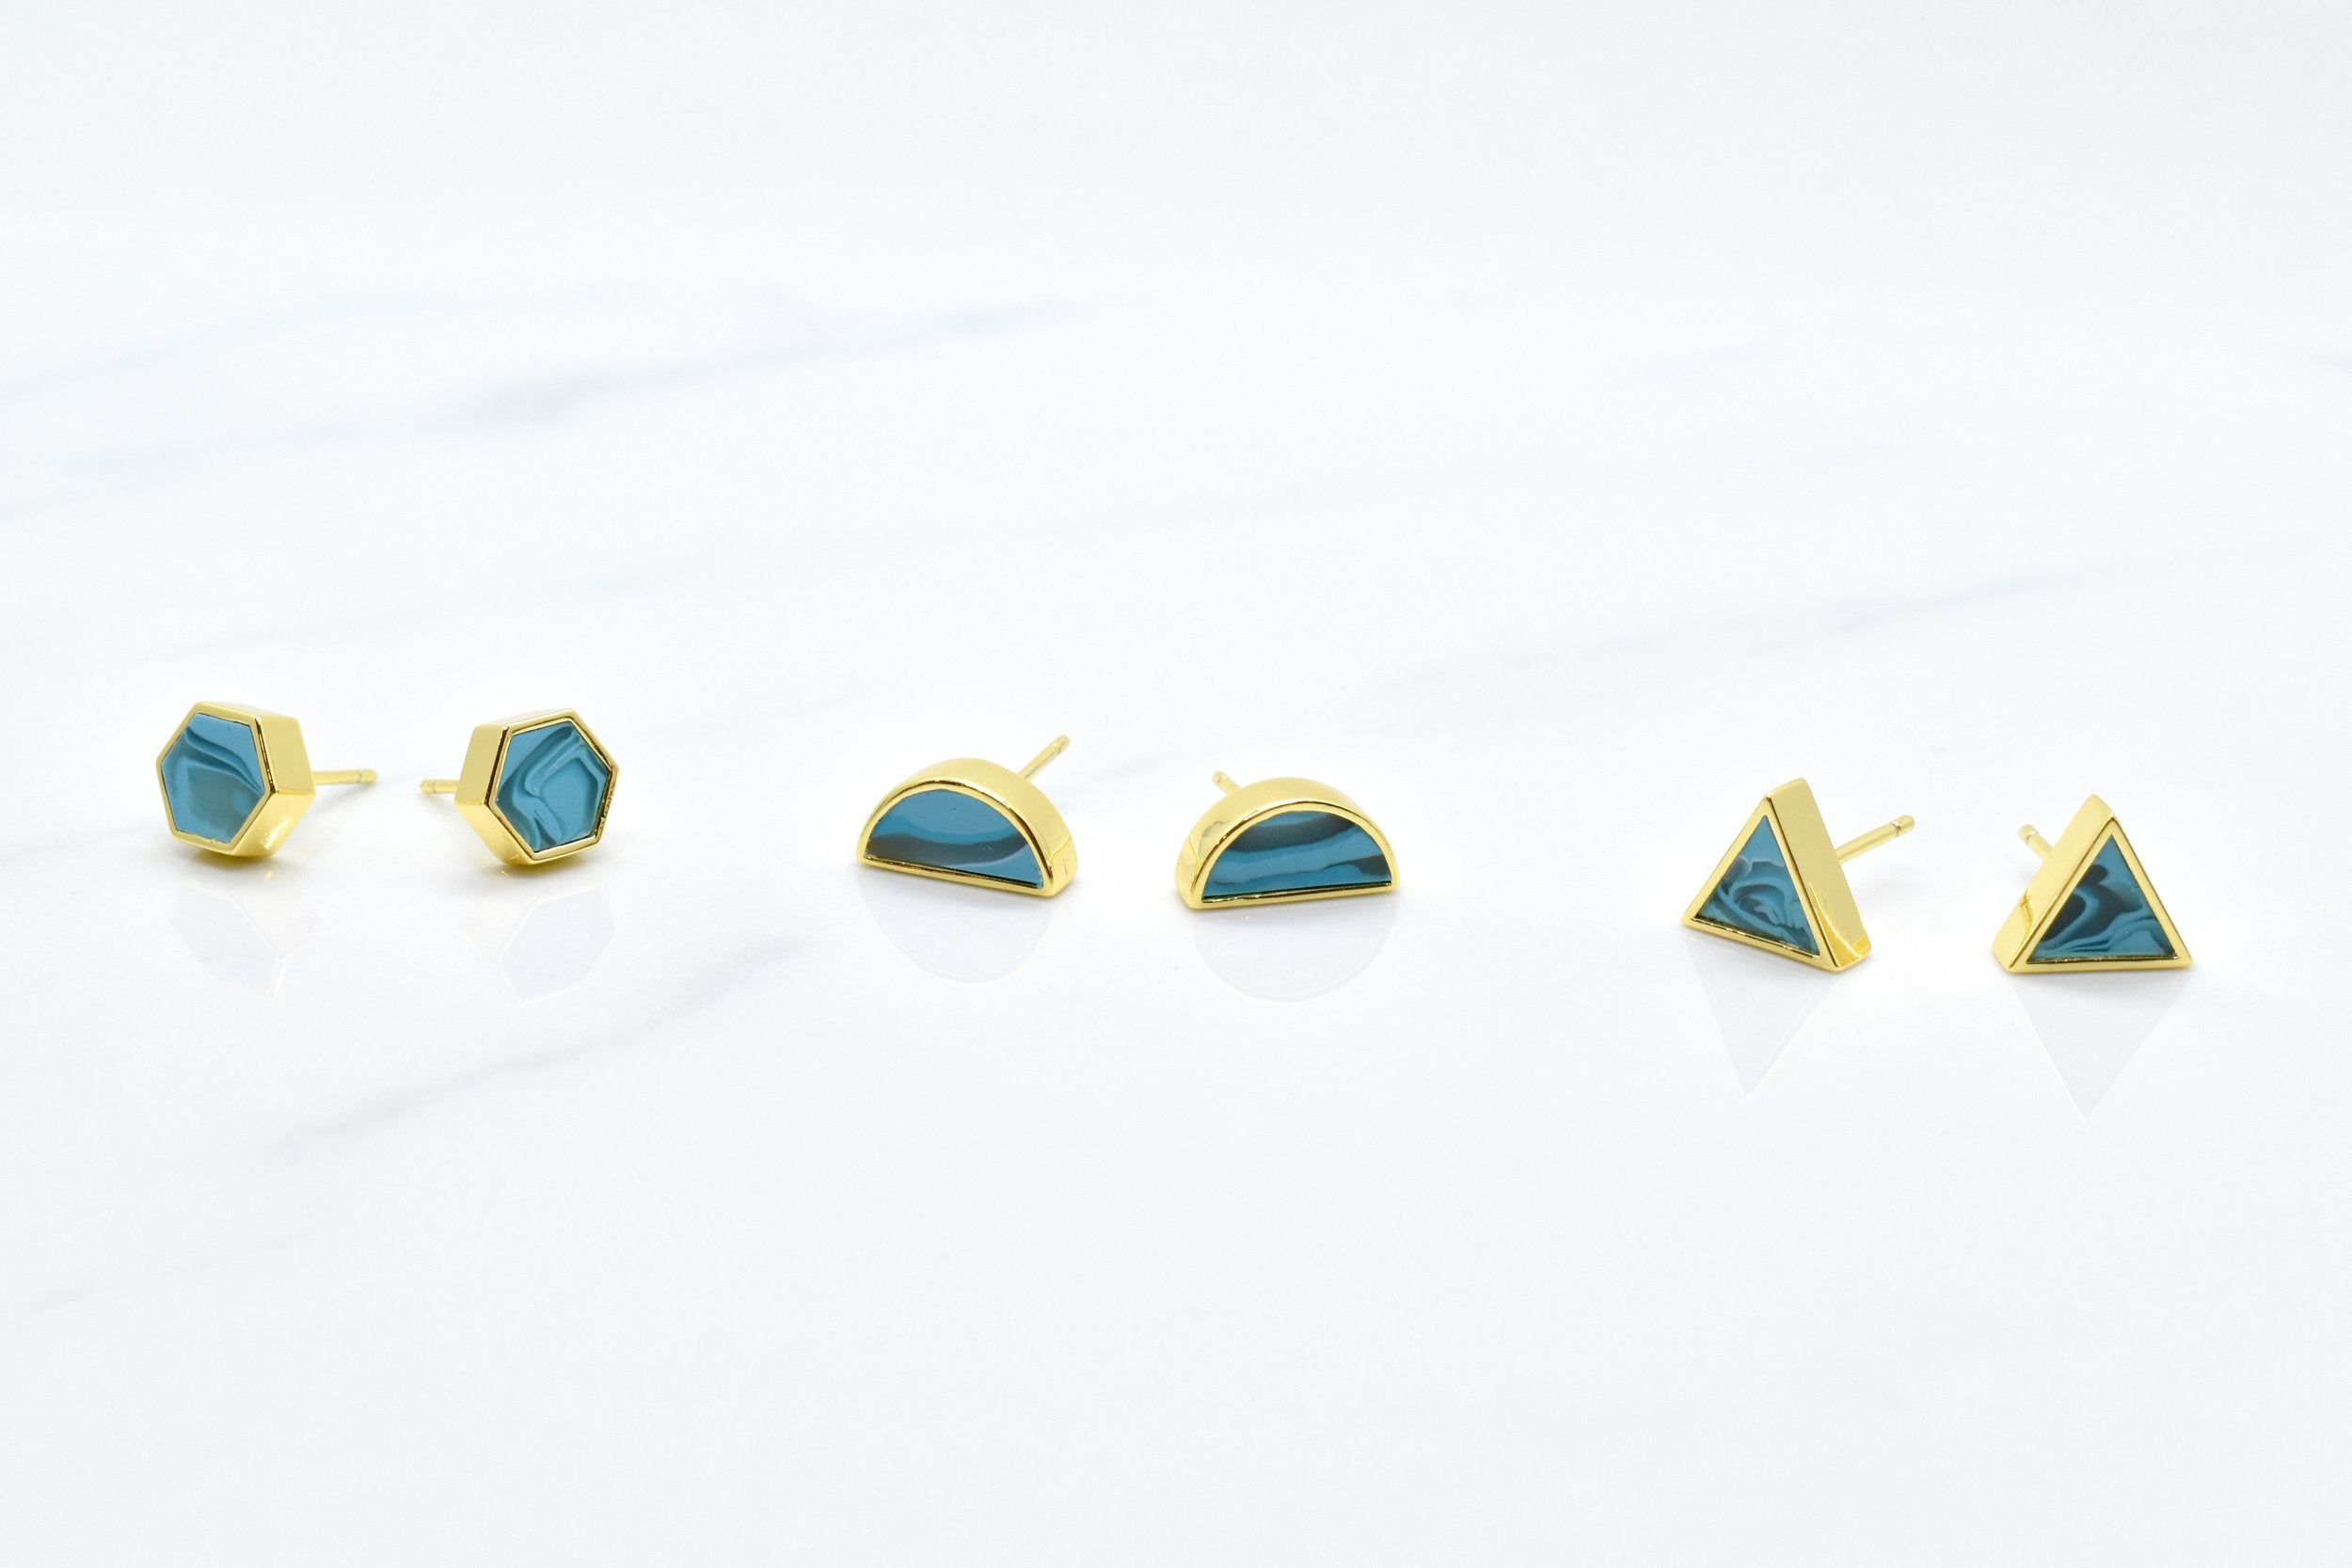 three pairs of geometric earrings shown on a white background, geometric stud set in 14k gold plated sterling silver and aqua marbled clay